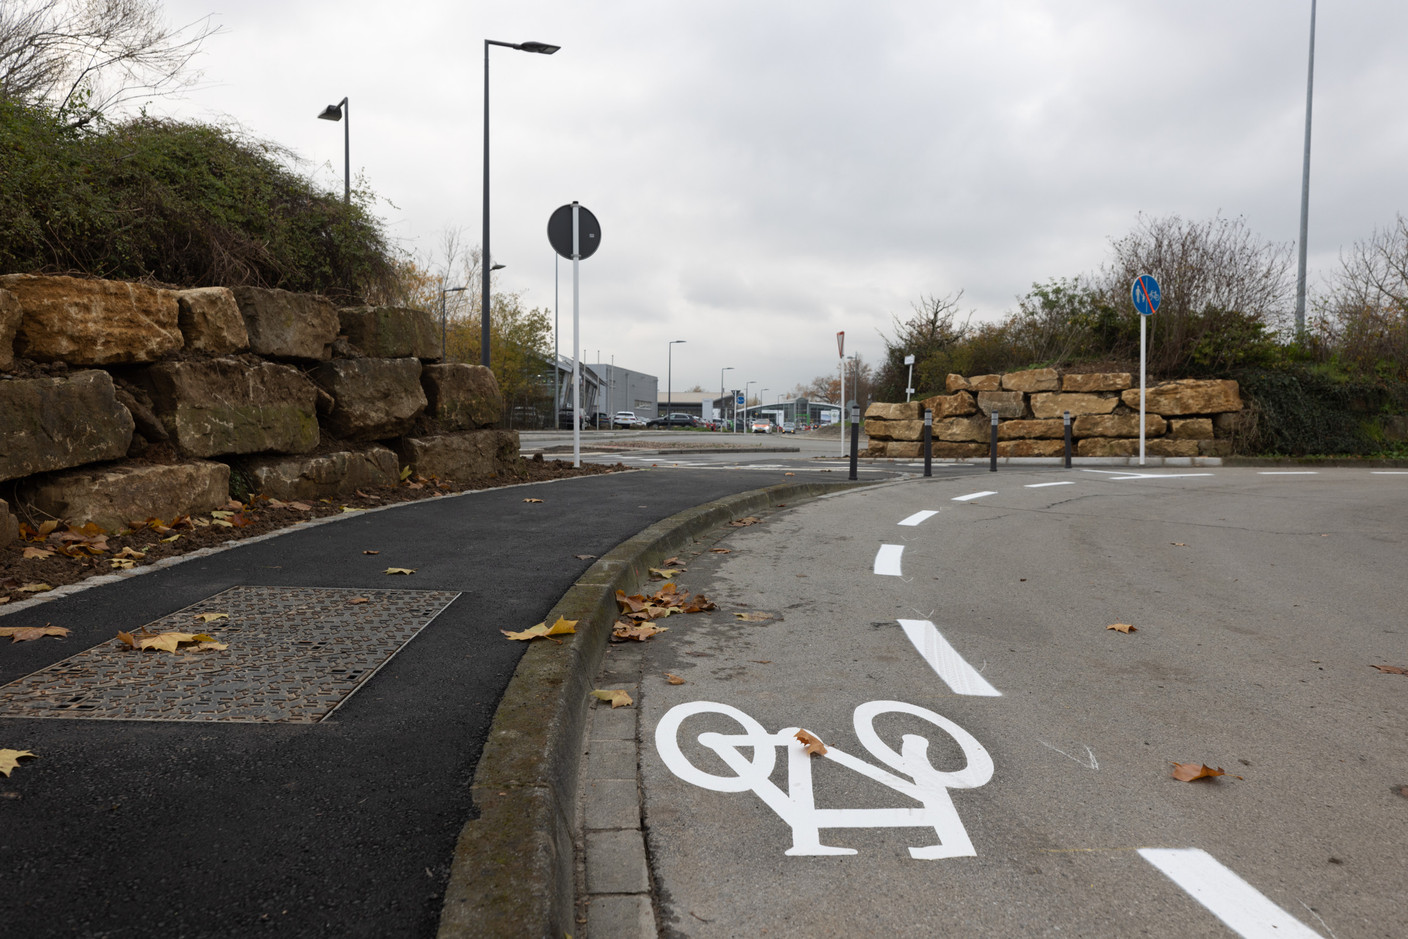 The cycle path starts on rue Henry Bessemer in Esch/Alzette where cyclists share the road with motorists. (Photo: Guy Wolff/Maison Moderne)